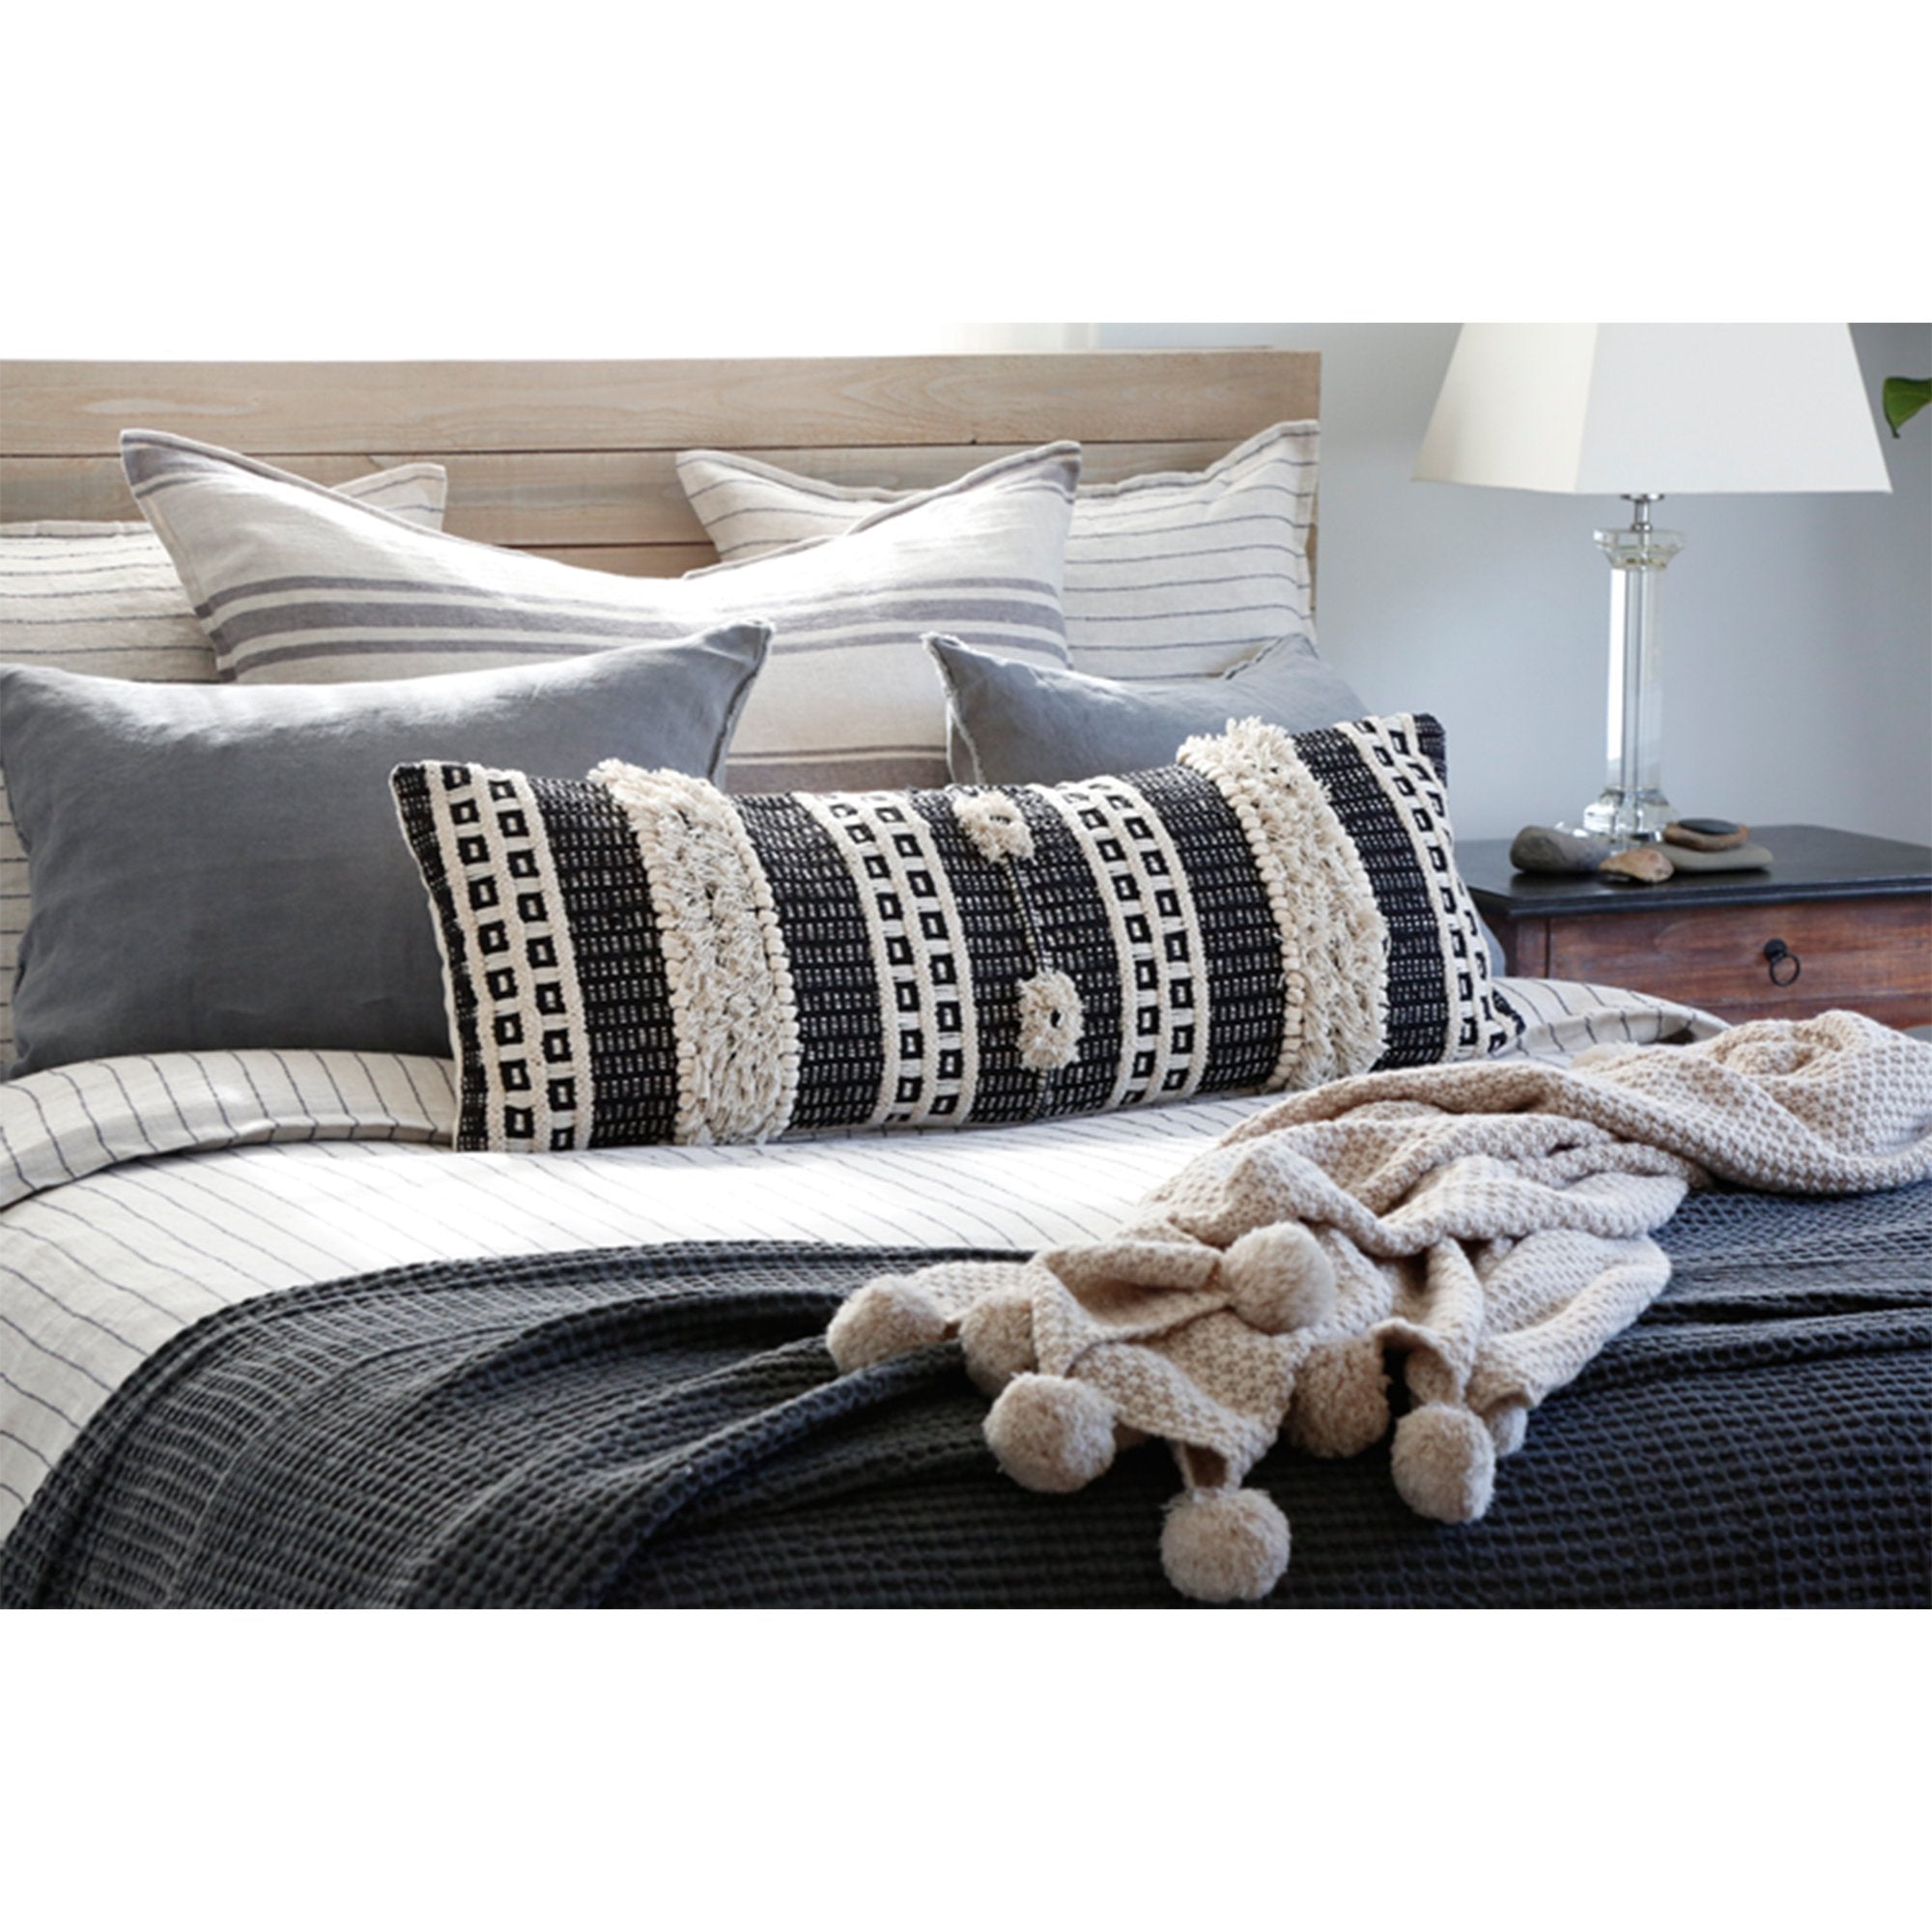 Zuma Blanket Collection - Charcoal-Pom Pom at Home